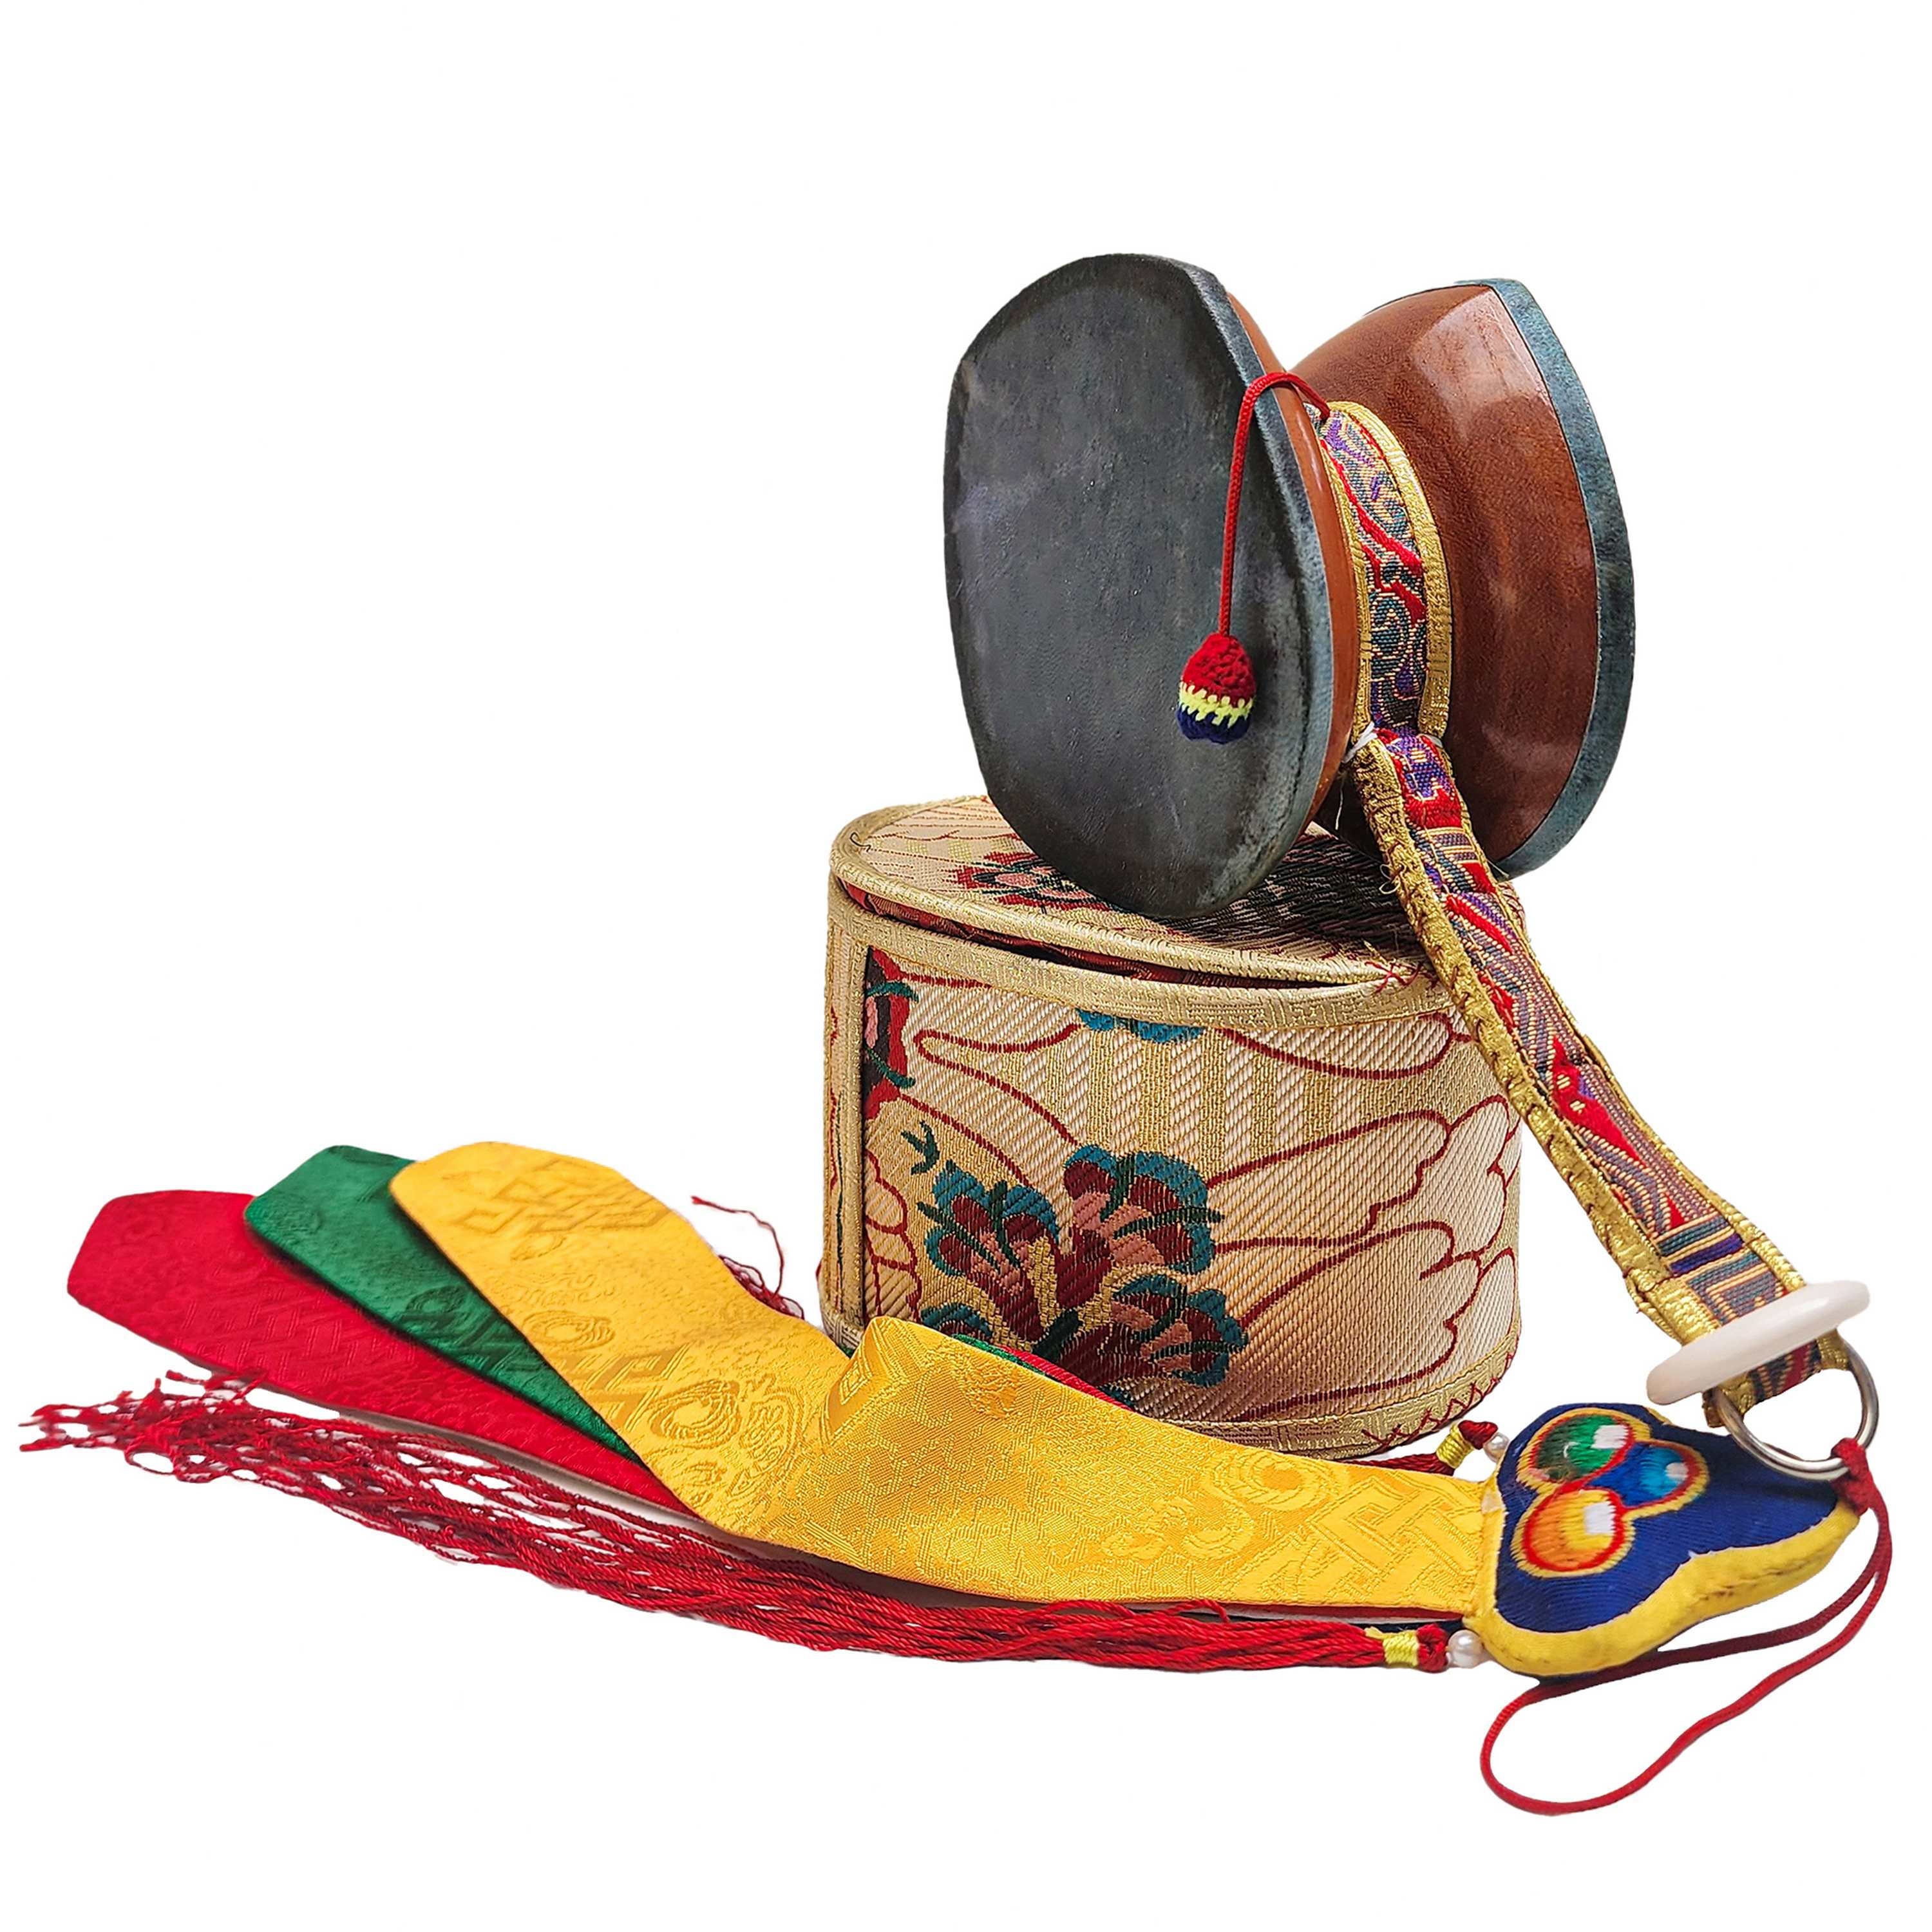 Chod Damru, The Tibetan chod Damaru, medium Quality A Traditional Musical Instrument From Tibet, high Quality Wood With Brocade Cover And Tail